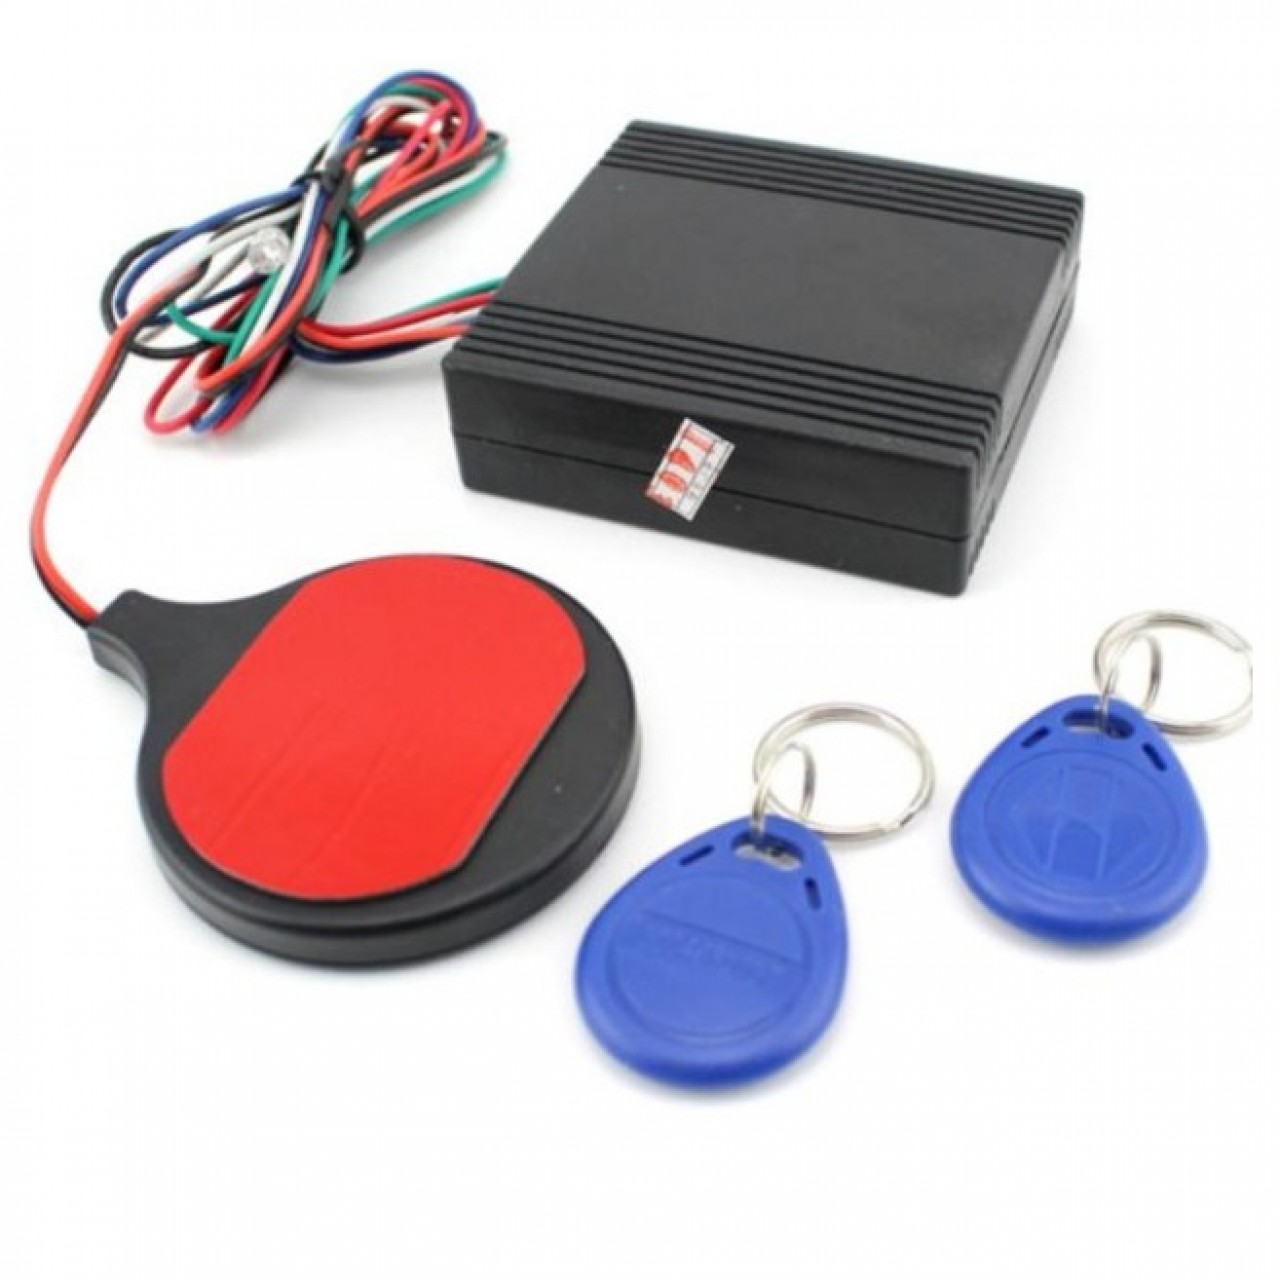 Motorcycle Bike IC card Alarm induction invisible lock Immobilizer Lock